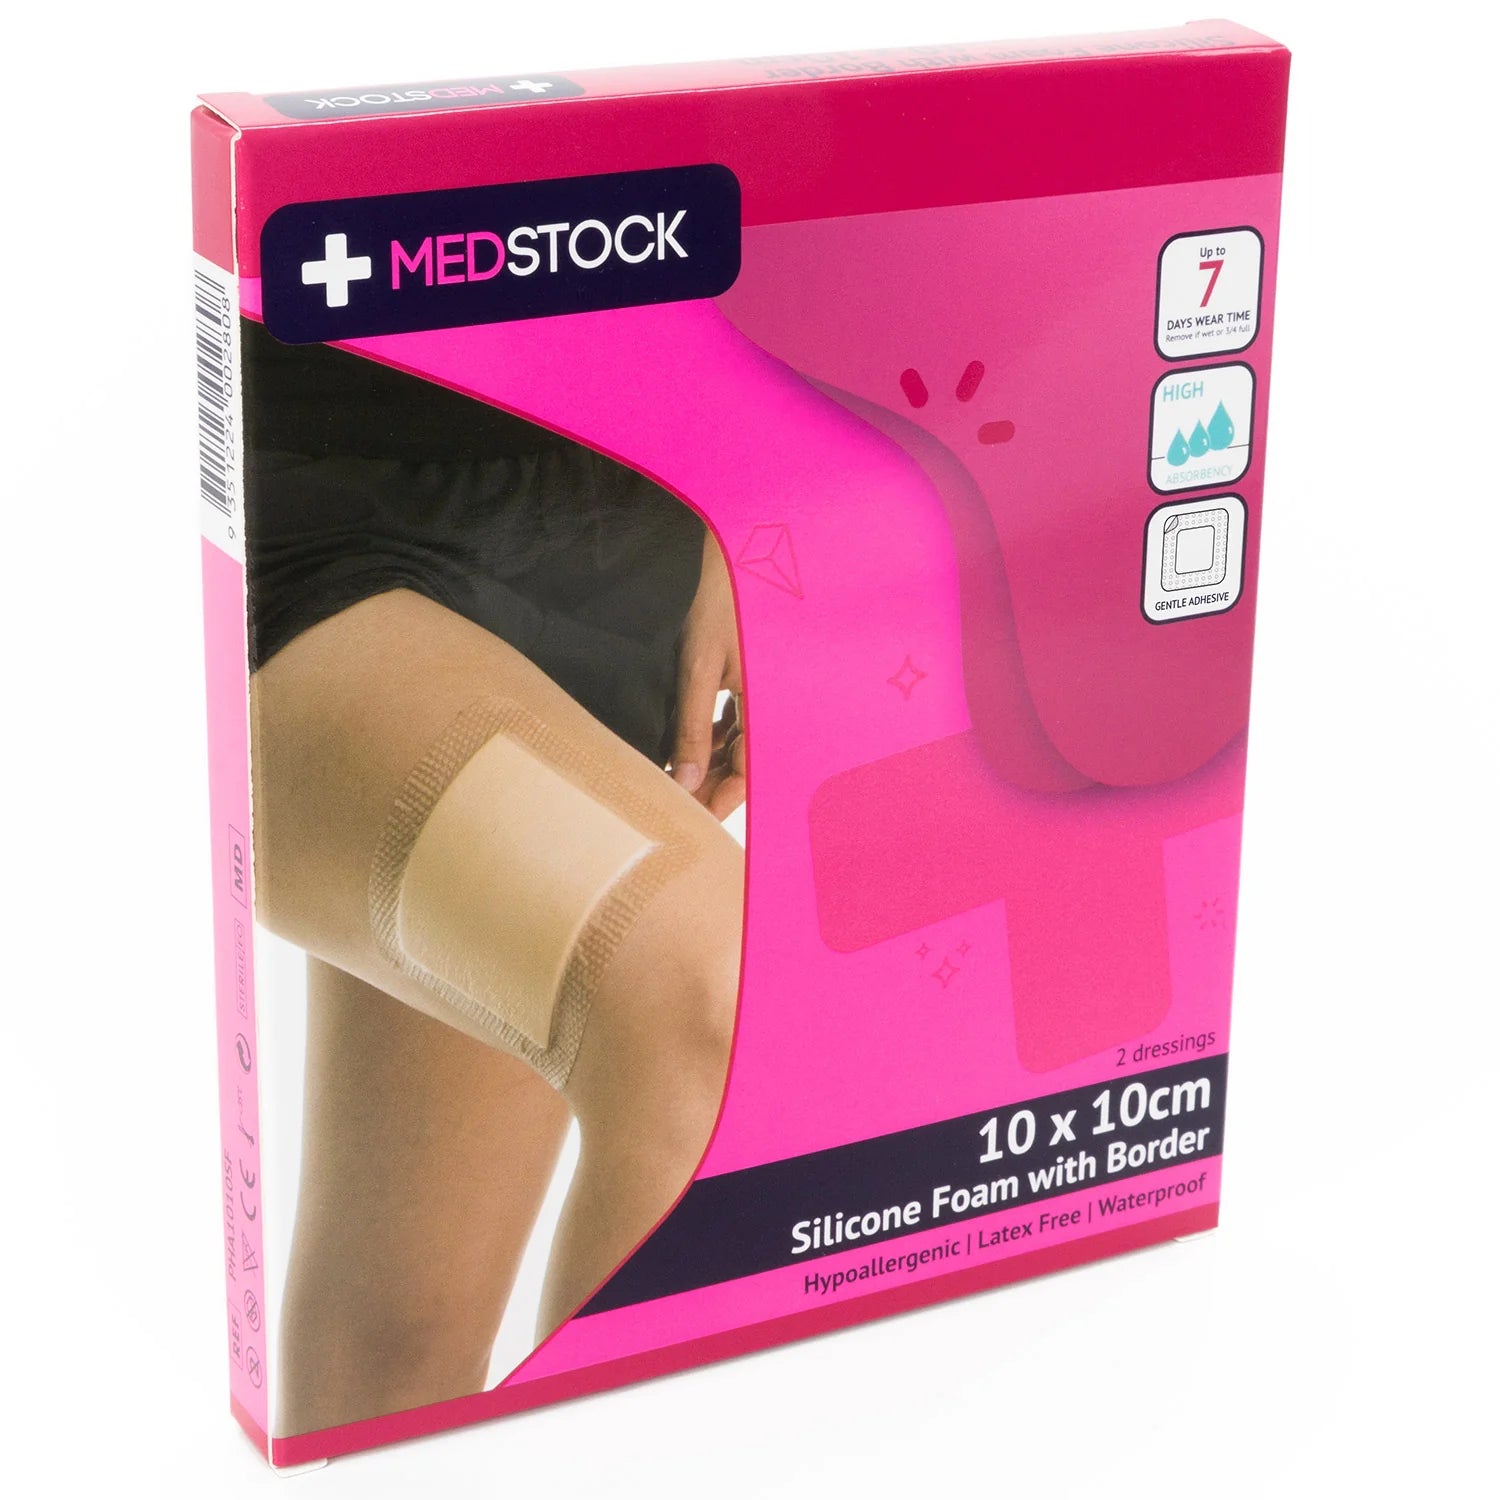 Medstock Multipack Silicone Foam Dressing With Border -Box of 2